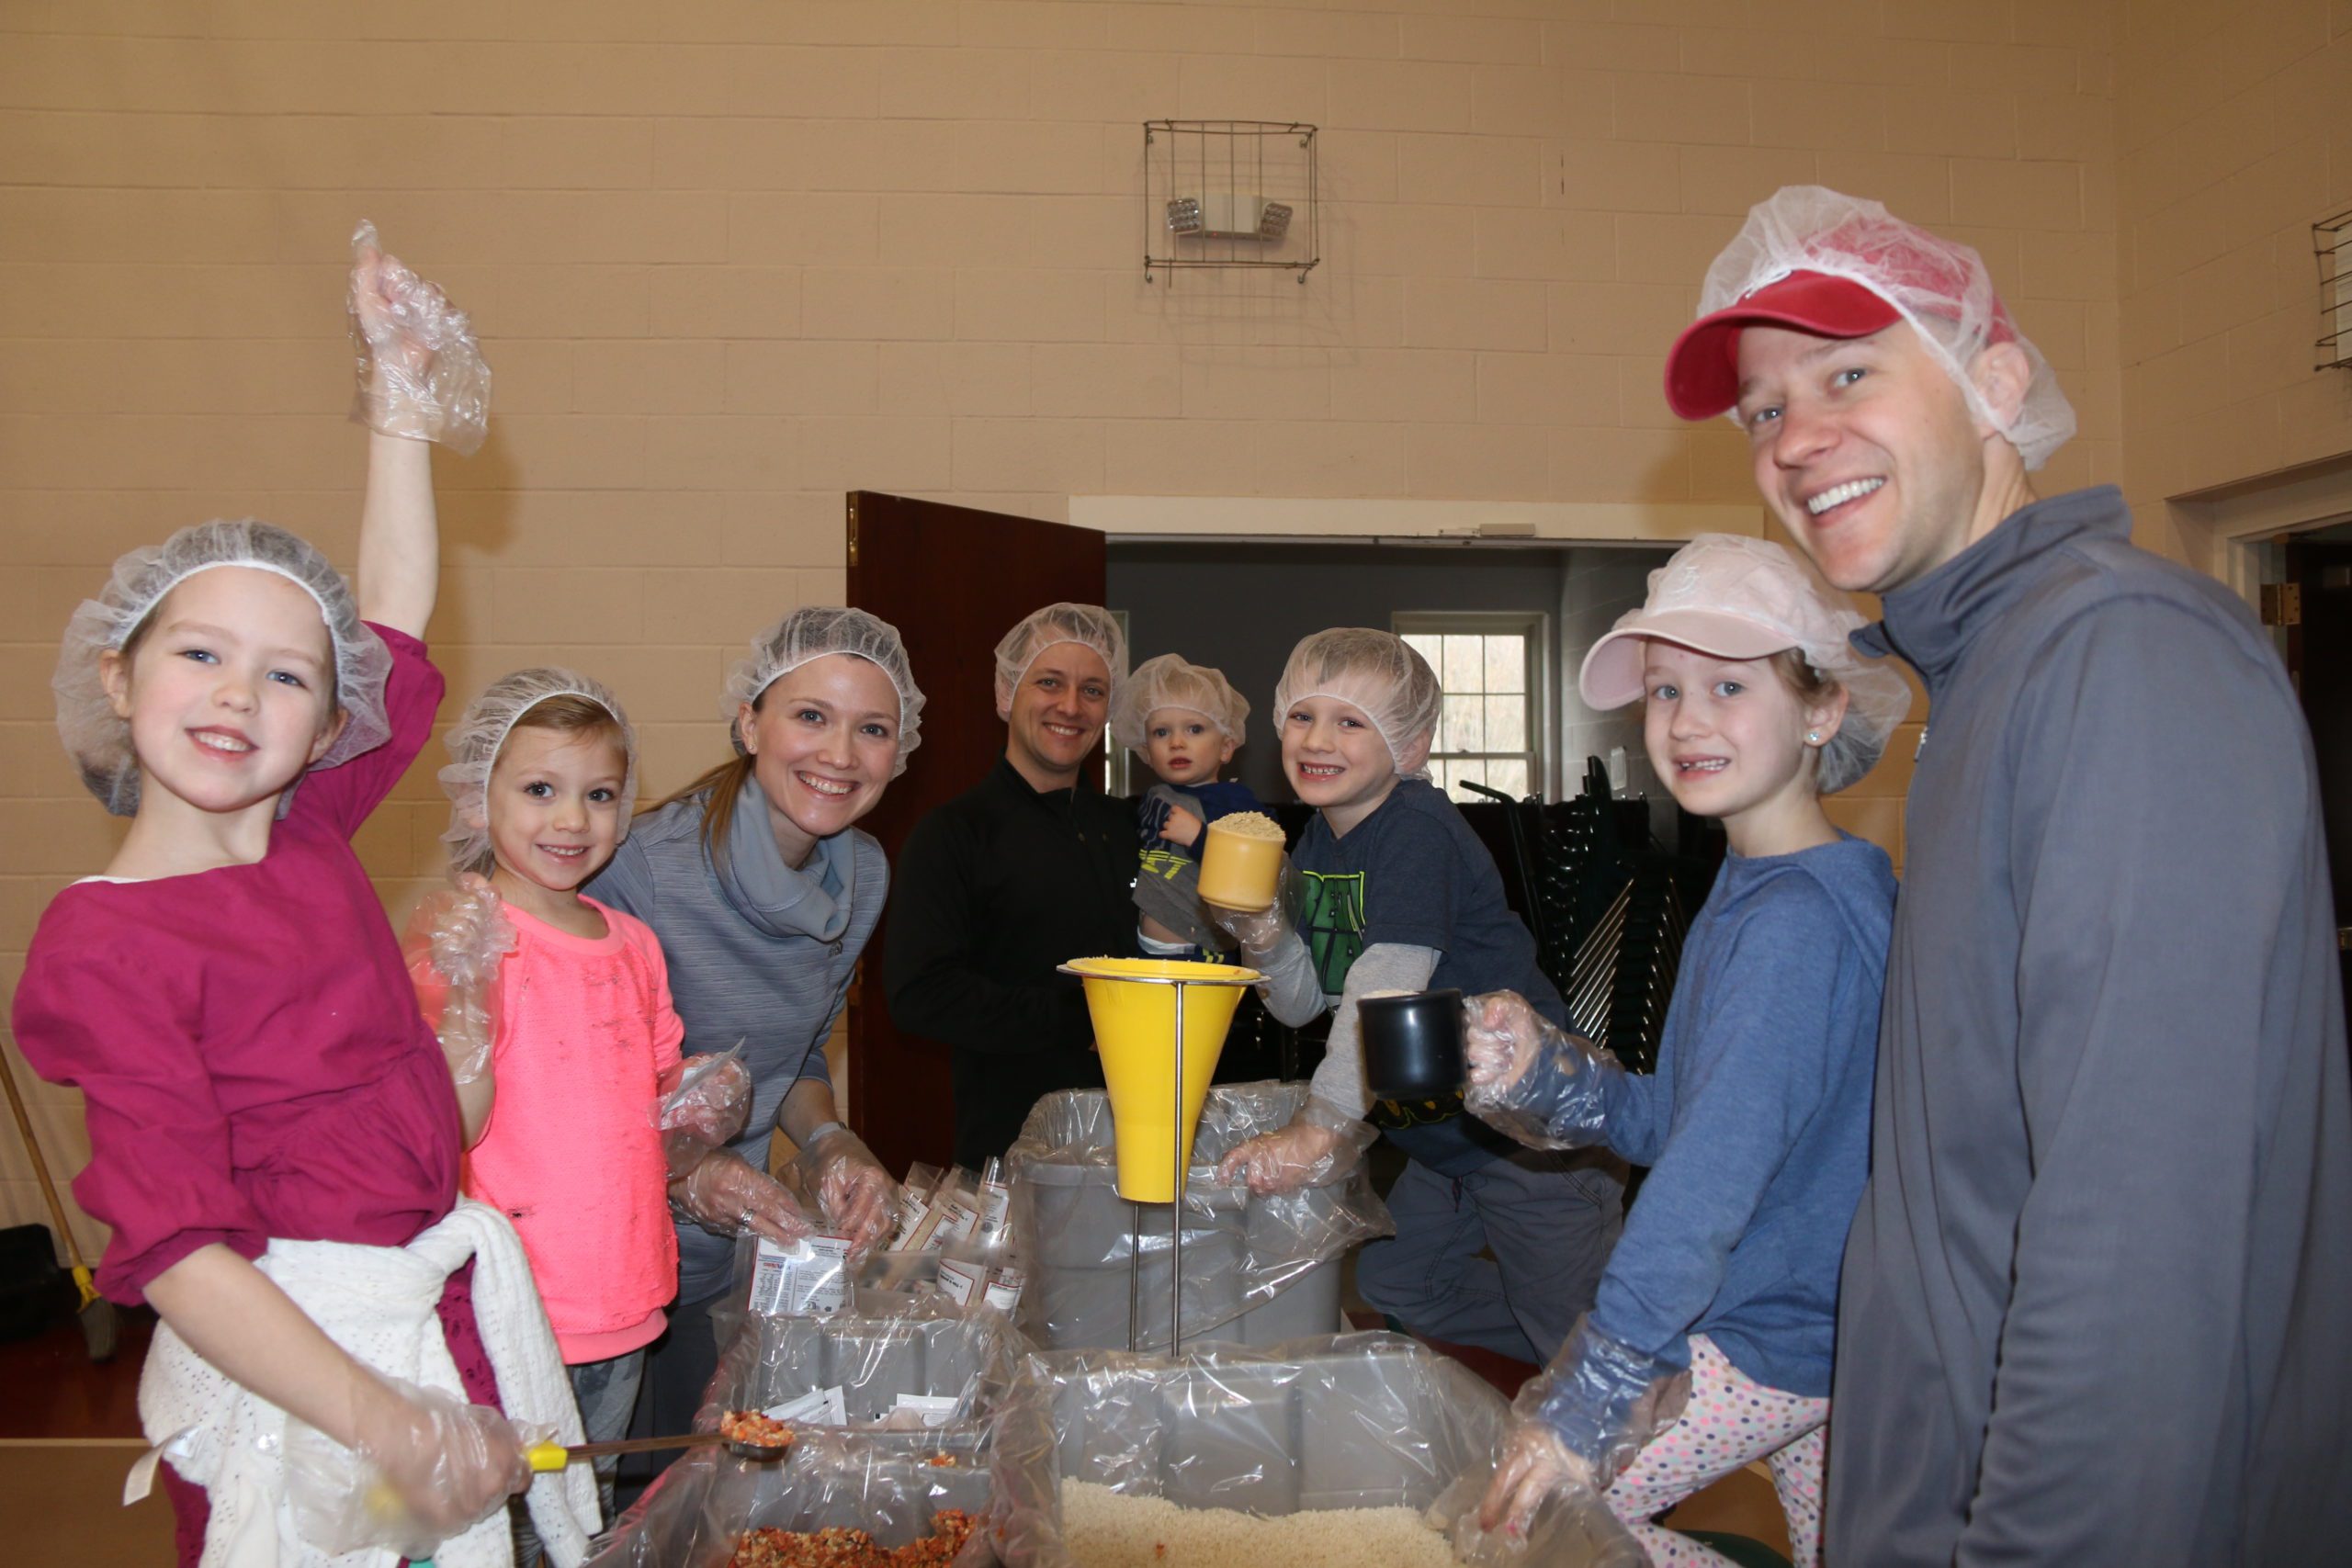 volunteer kids and adults wearing hair nets and packaging food for those in need